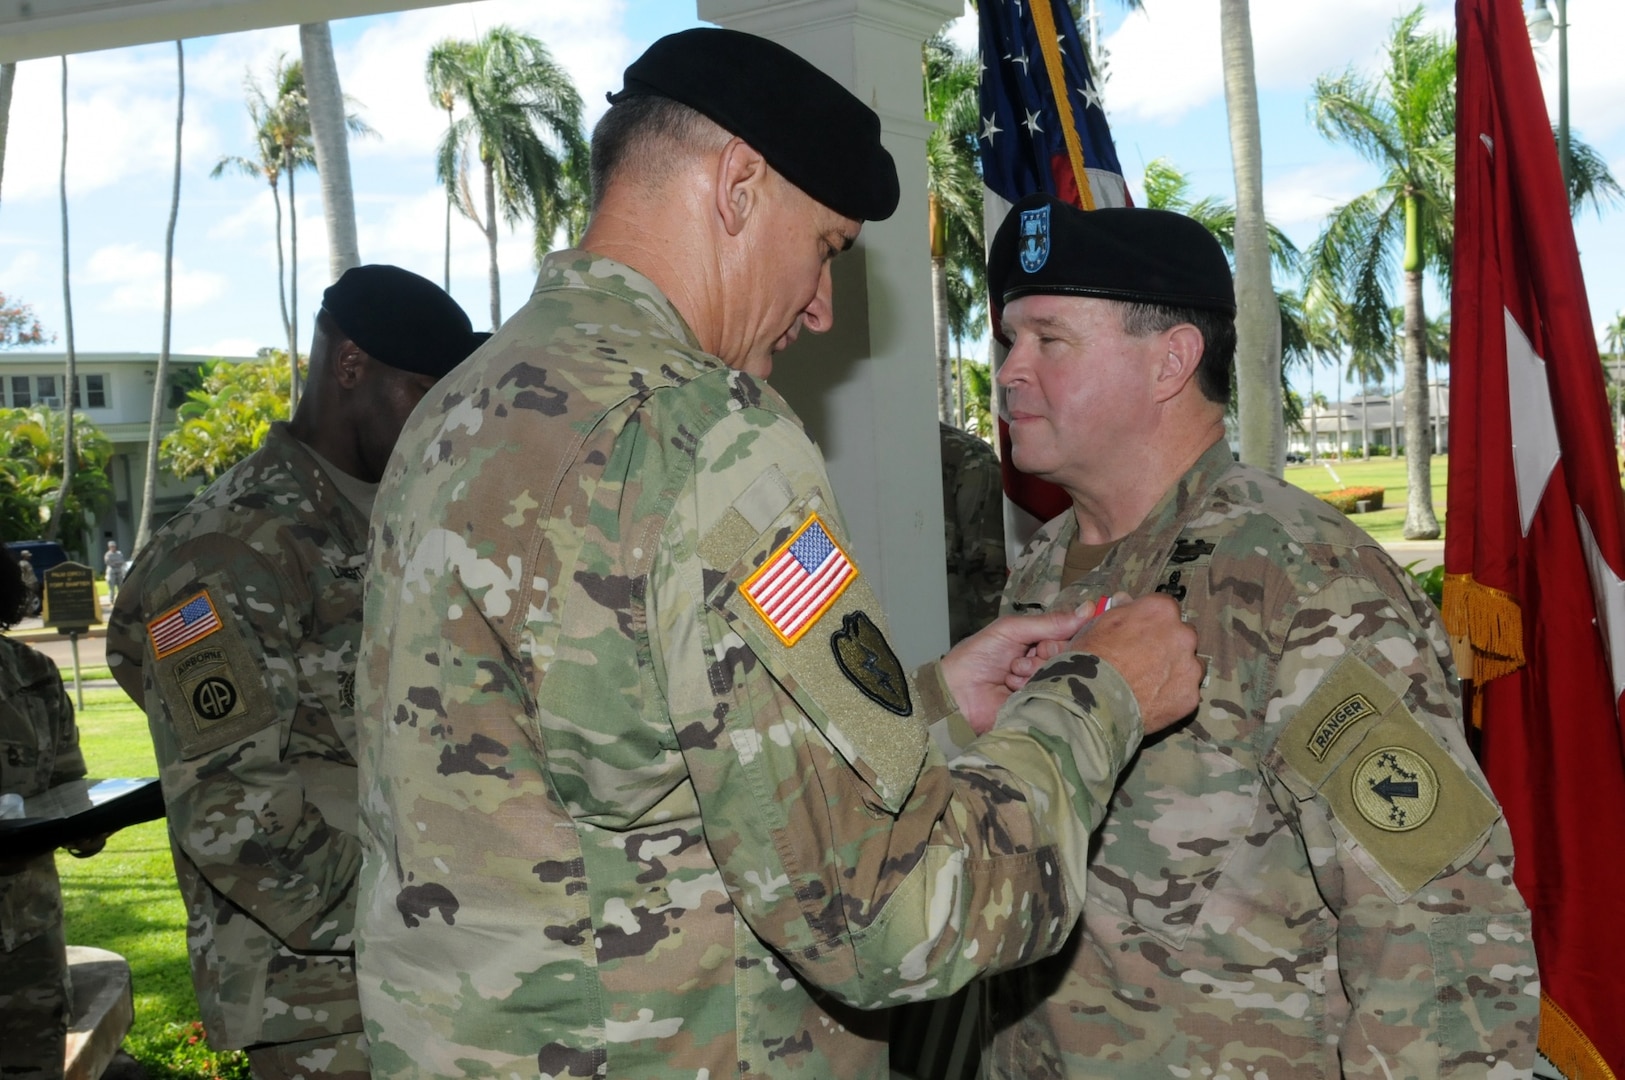 U.S. Army Pacific Commanding General Gen. Robert B. Brown (left) presents Maj. Gen. Mark J. O'Neil, Chief of Staff, U. S. Army Pacific, with the Distinguished Service Medal "For Exceptionally Meritorious Service In A Duty Of Great Responsibility" at a Flying "V" ceremony held at historic Palm Circle, Fort Shafter, Hawaii, June 9. The Flying "V" ceremony was held to honor O'Neil for his distinguished service as he prepares to depart USARPAC. The "V" refers to the way the colors are posted during the ceremony, which is V-shaped.